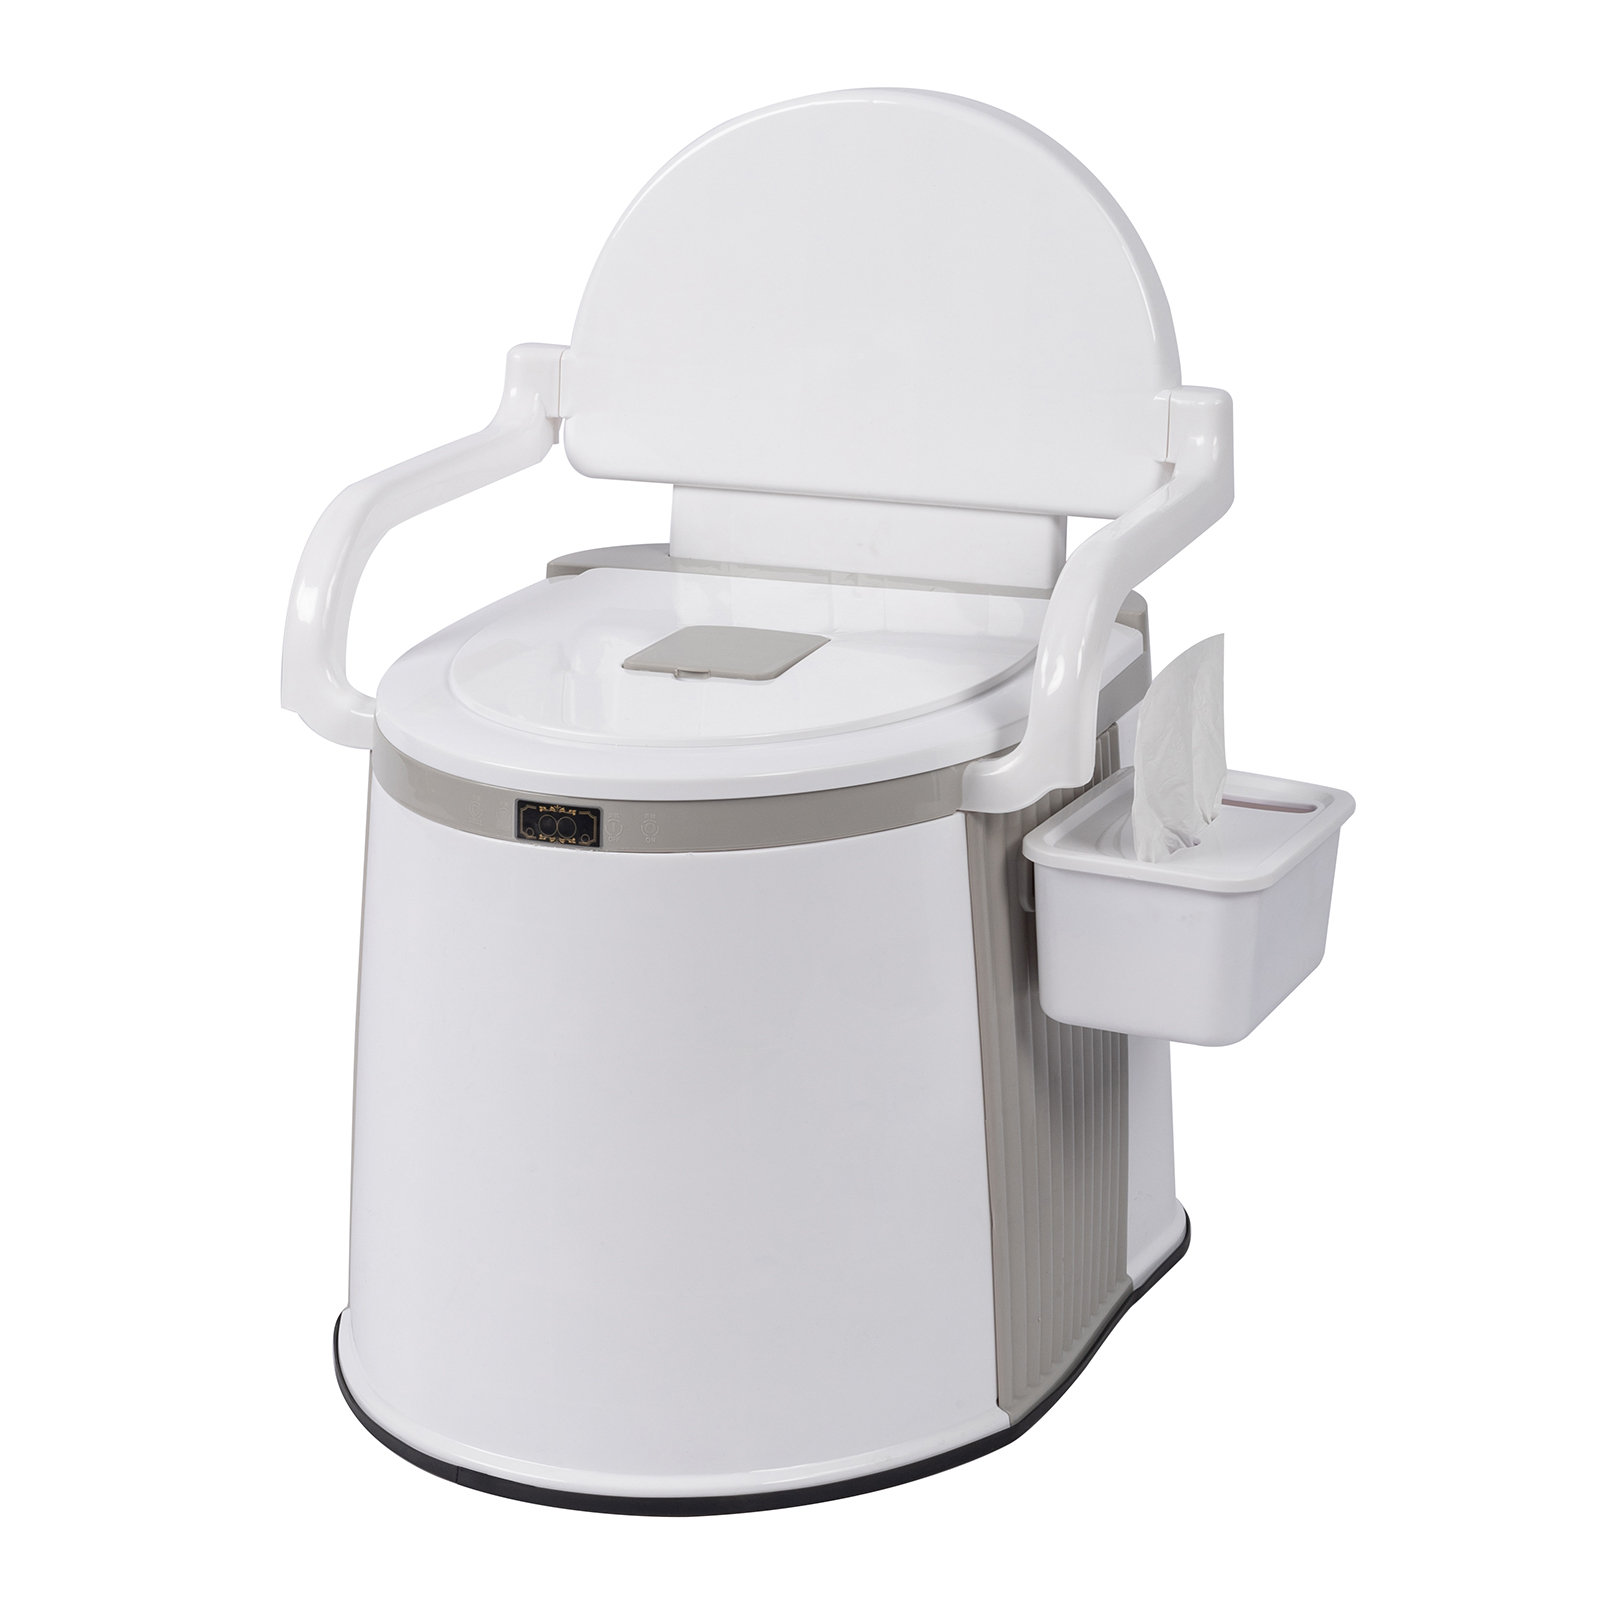 Portable Camping Toilet For Outdoor with 6-8 Gallon Capacity Bags